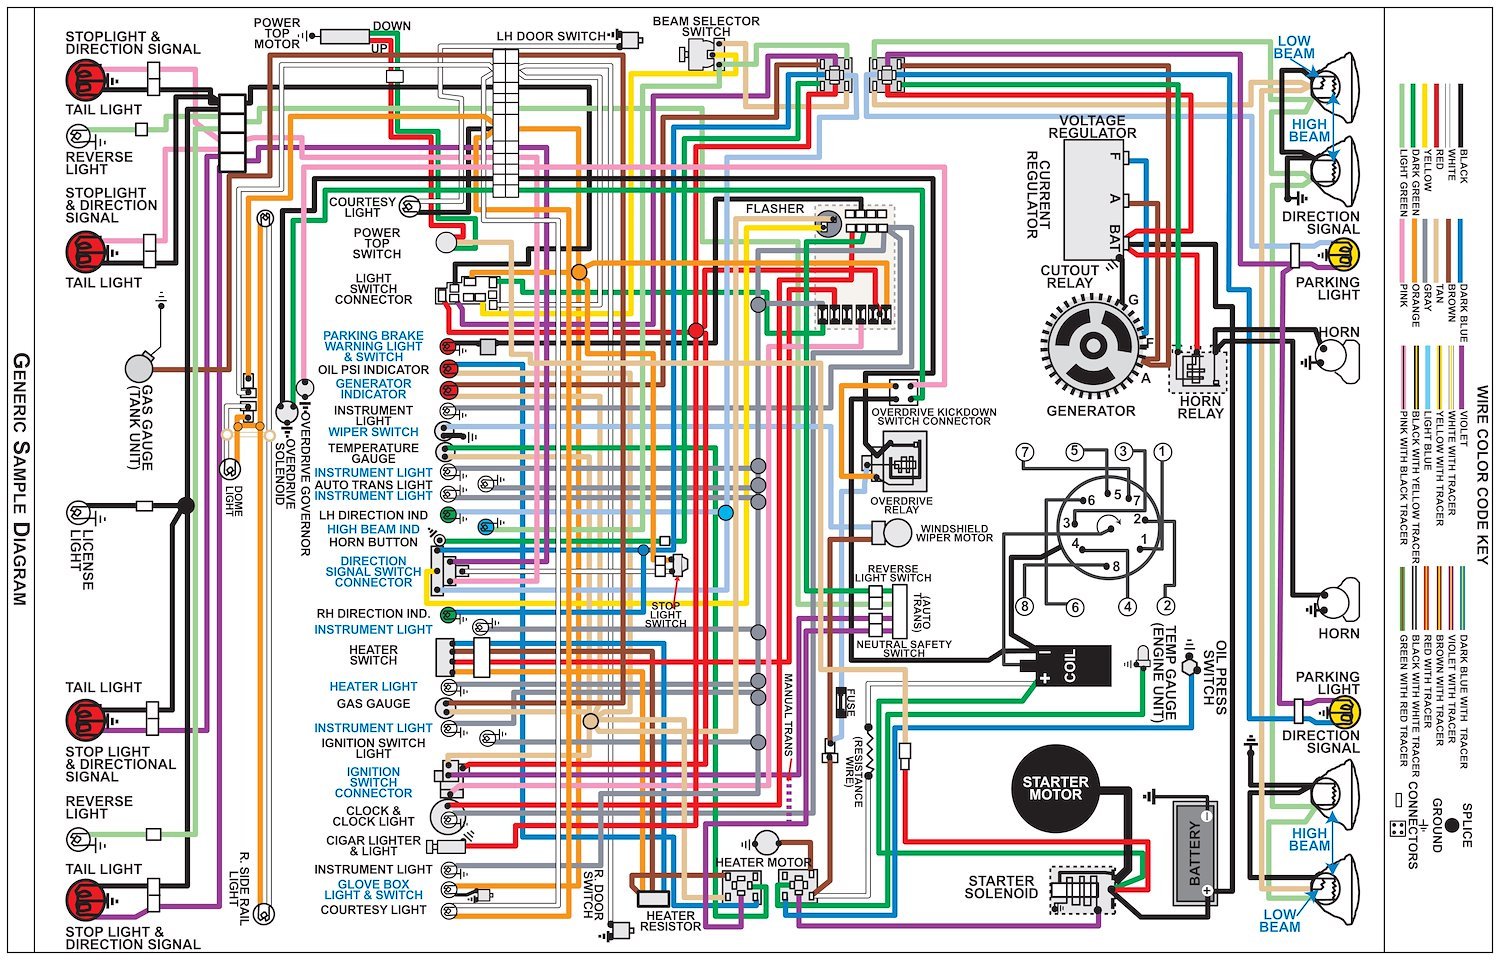 Wiring Diagram for 1973 Dodge Charger with Rallye Dash, 11 in x 17 in., Laminated